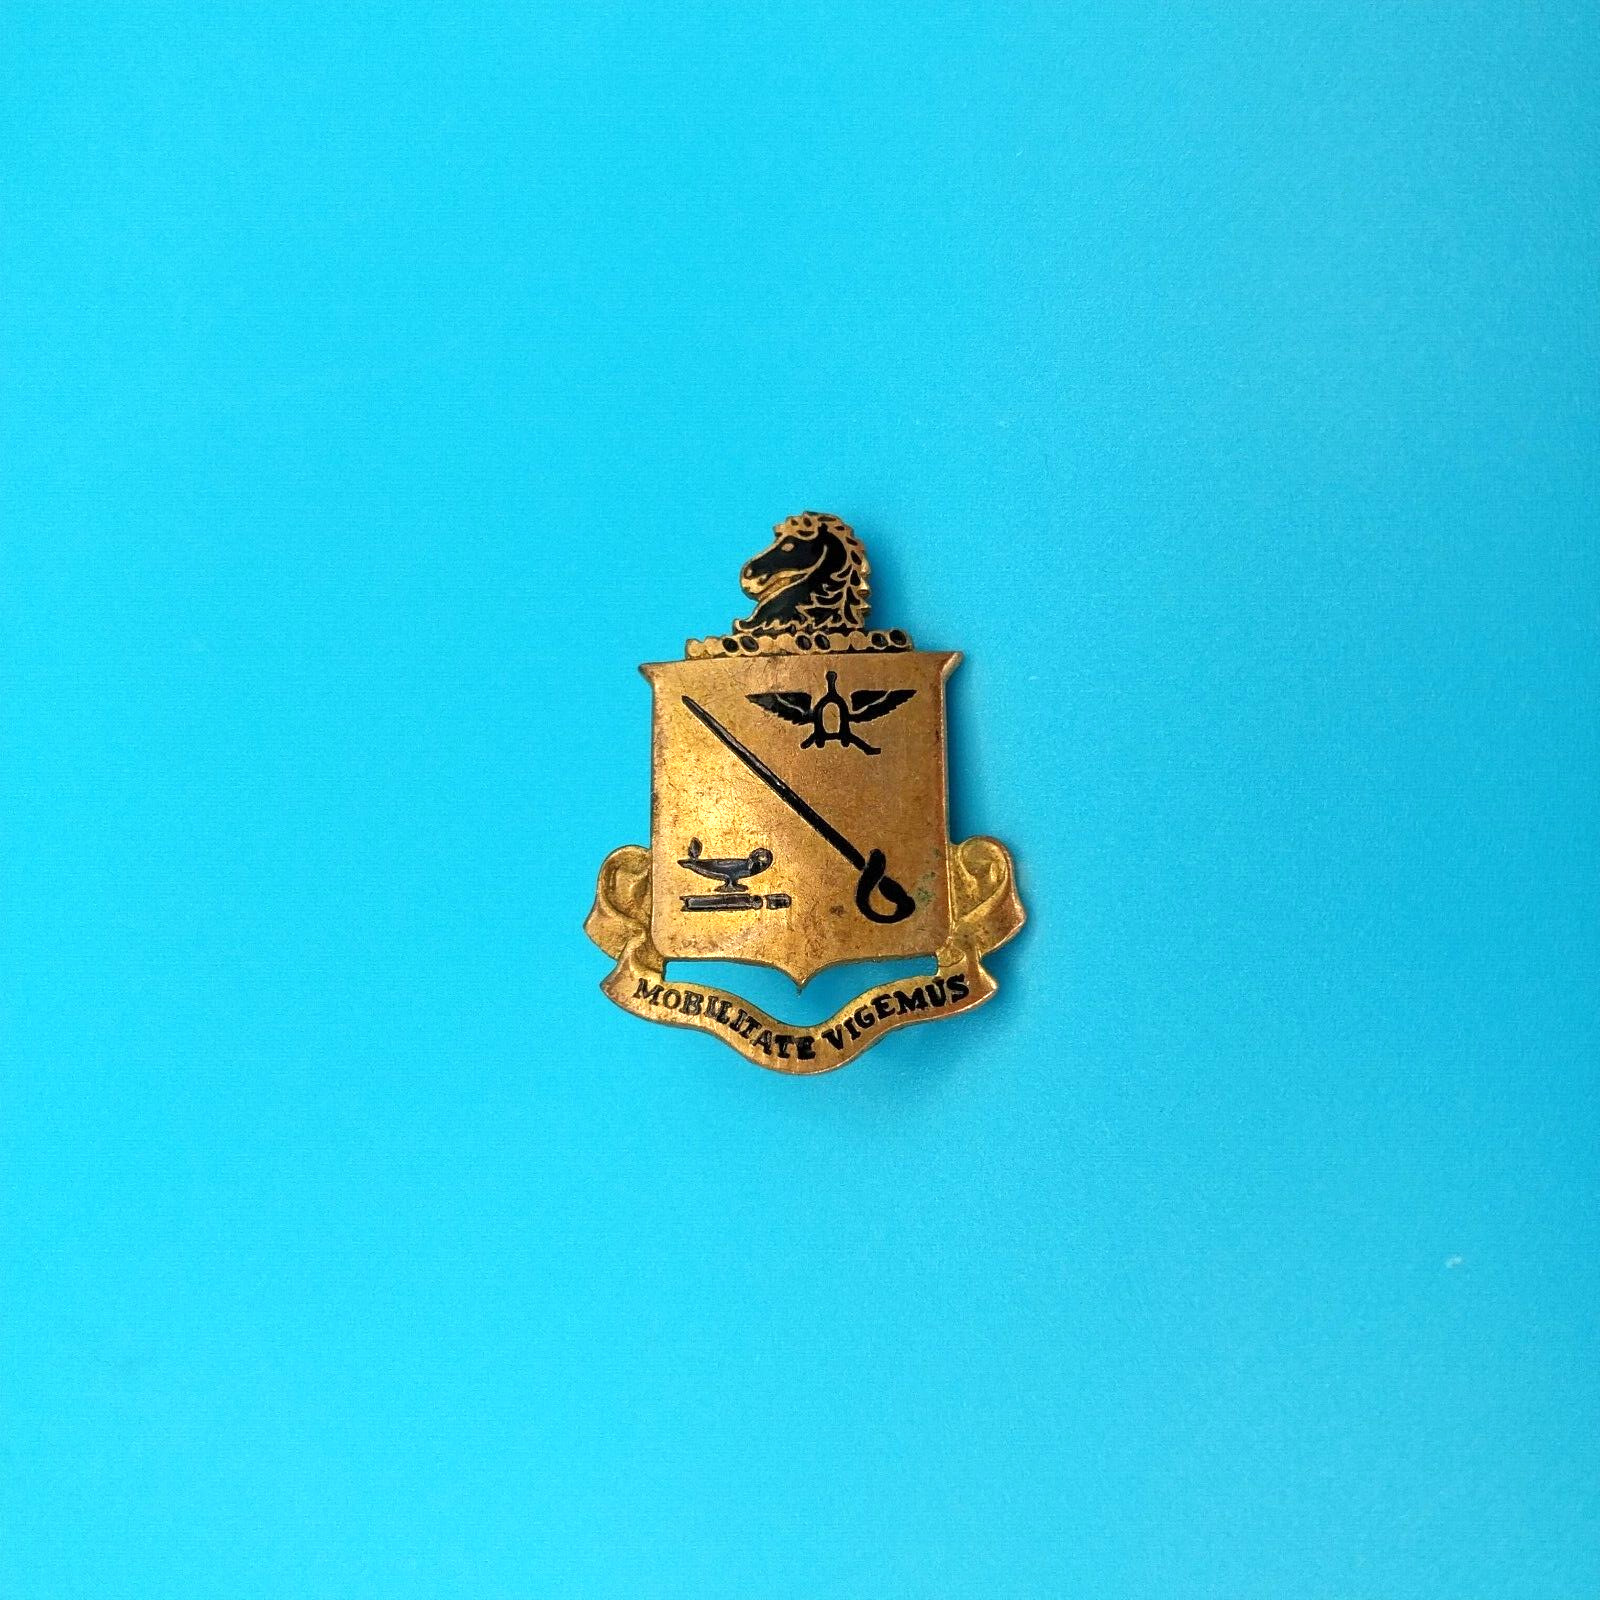 Pre WWII US Army Cavalry Pin Authentic Mobilitate Vigemus Military Ft. Riley Pin